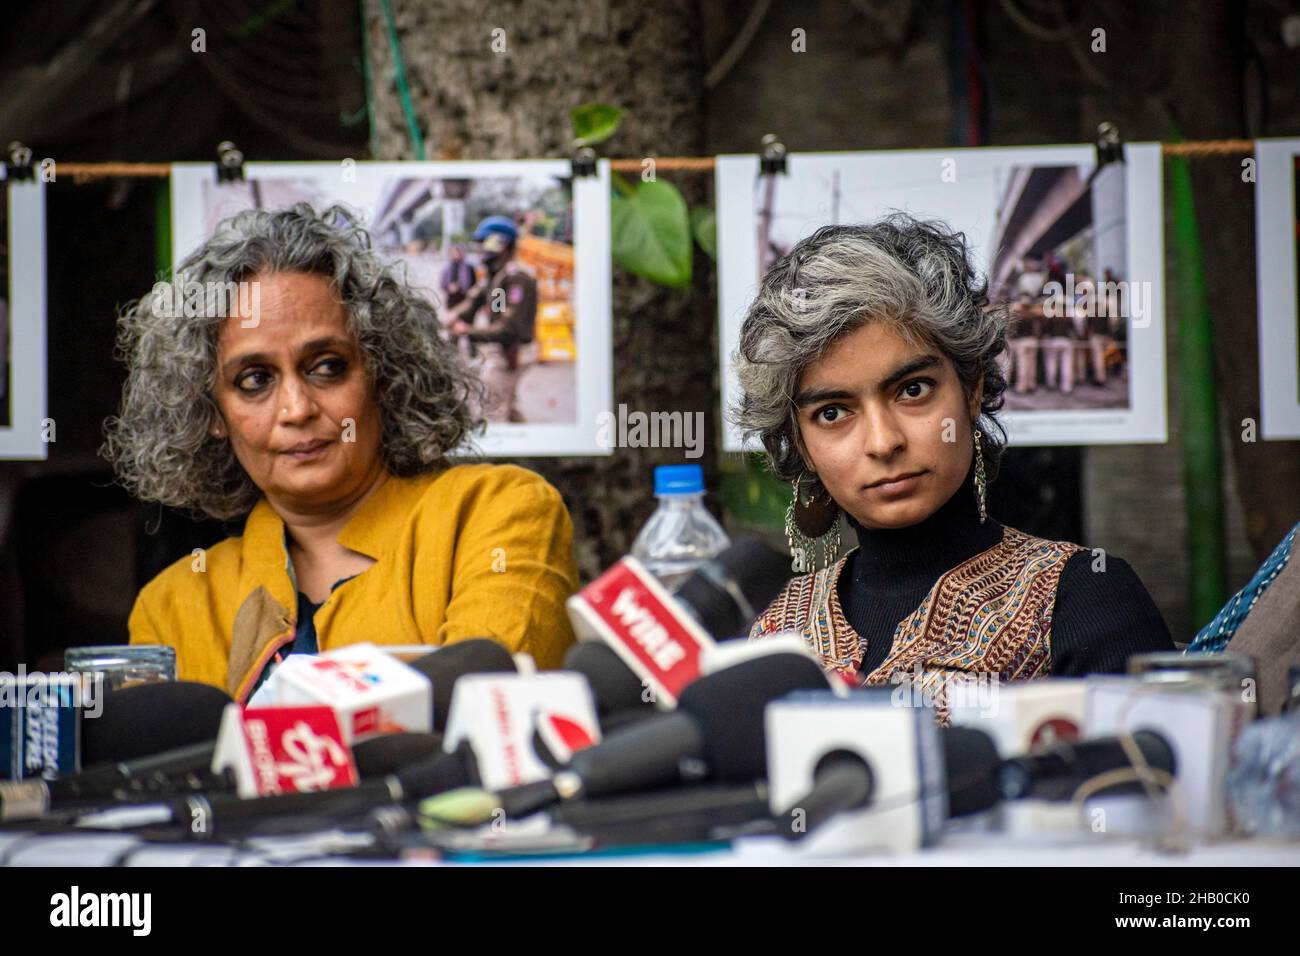 New Delhi, Delhi, India. 15th Dec, 2021. Arundhati Roy along with Radhika Chitkara (People's Union for Democratic Rights) during the event marking 2 years of Attack on Jamia Millia Islamia, Central University on 15th December 2019.On 15th December 2019 the Delhi Police and the RAF officials entered the University without permission of the administration. The police and RAF officials made disproportionate use of force against students. Amongst other weaponries, pellets, rubber bullets and even live ammunition was discharged against young, protesting students. Tear gas shells and sound bombs Stock Photo